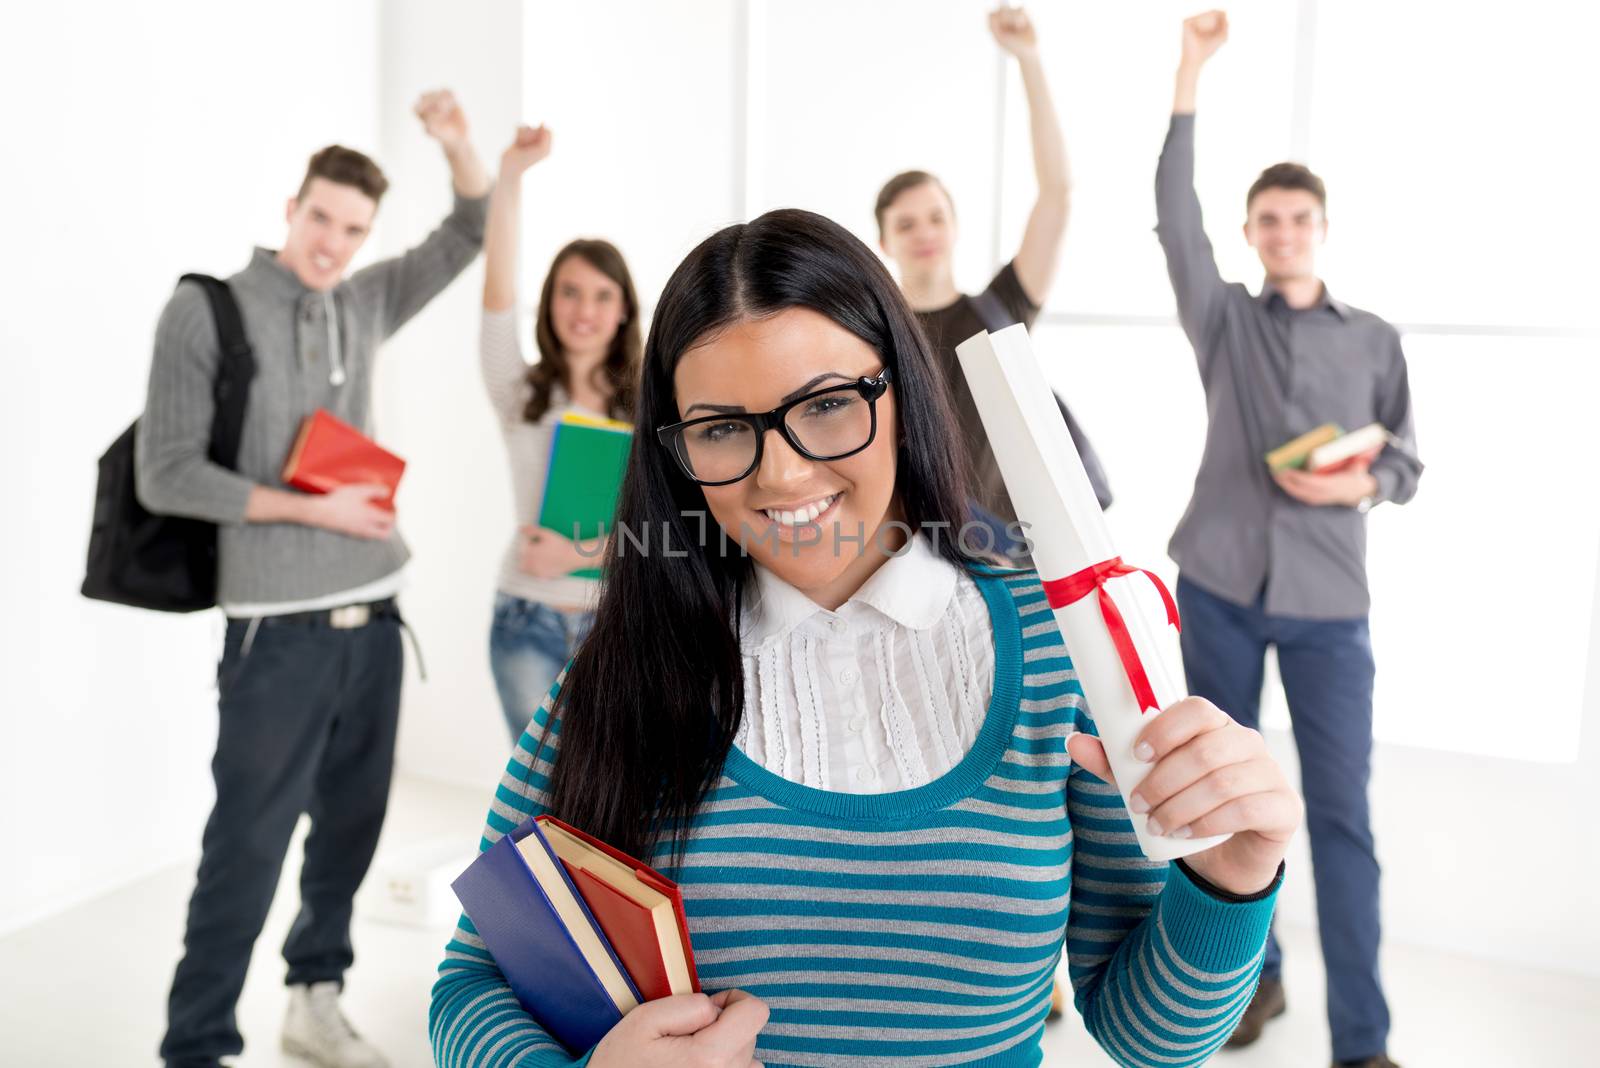 A beautiful smiling young student girl with diploma is standing in the foreground. A happy group of his friends is behind him with arms raised in a fist in the air.